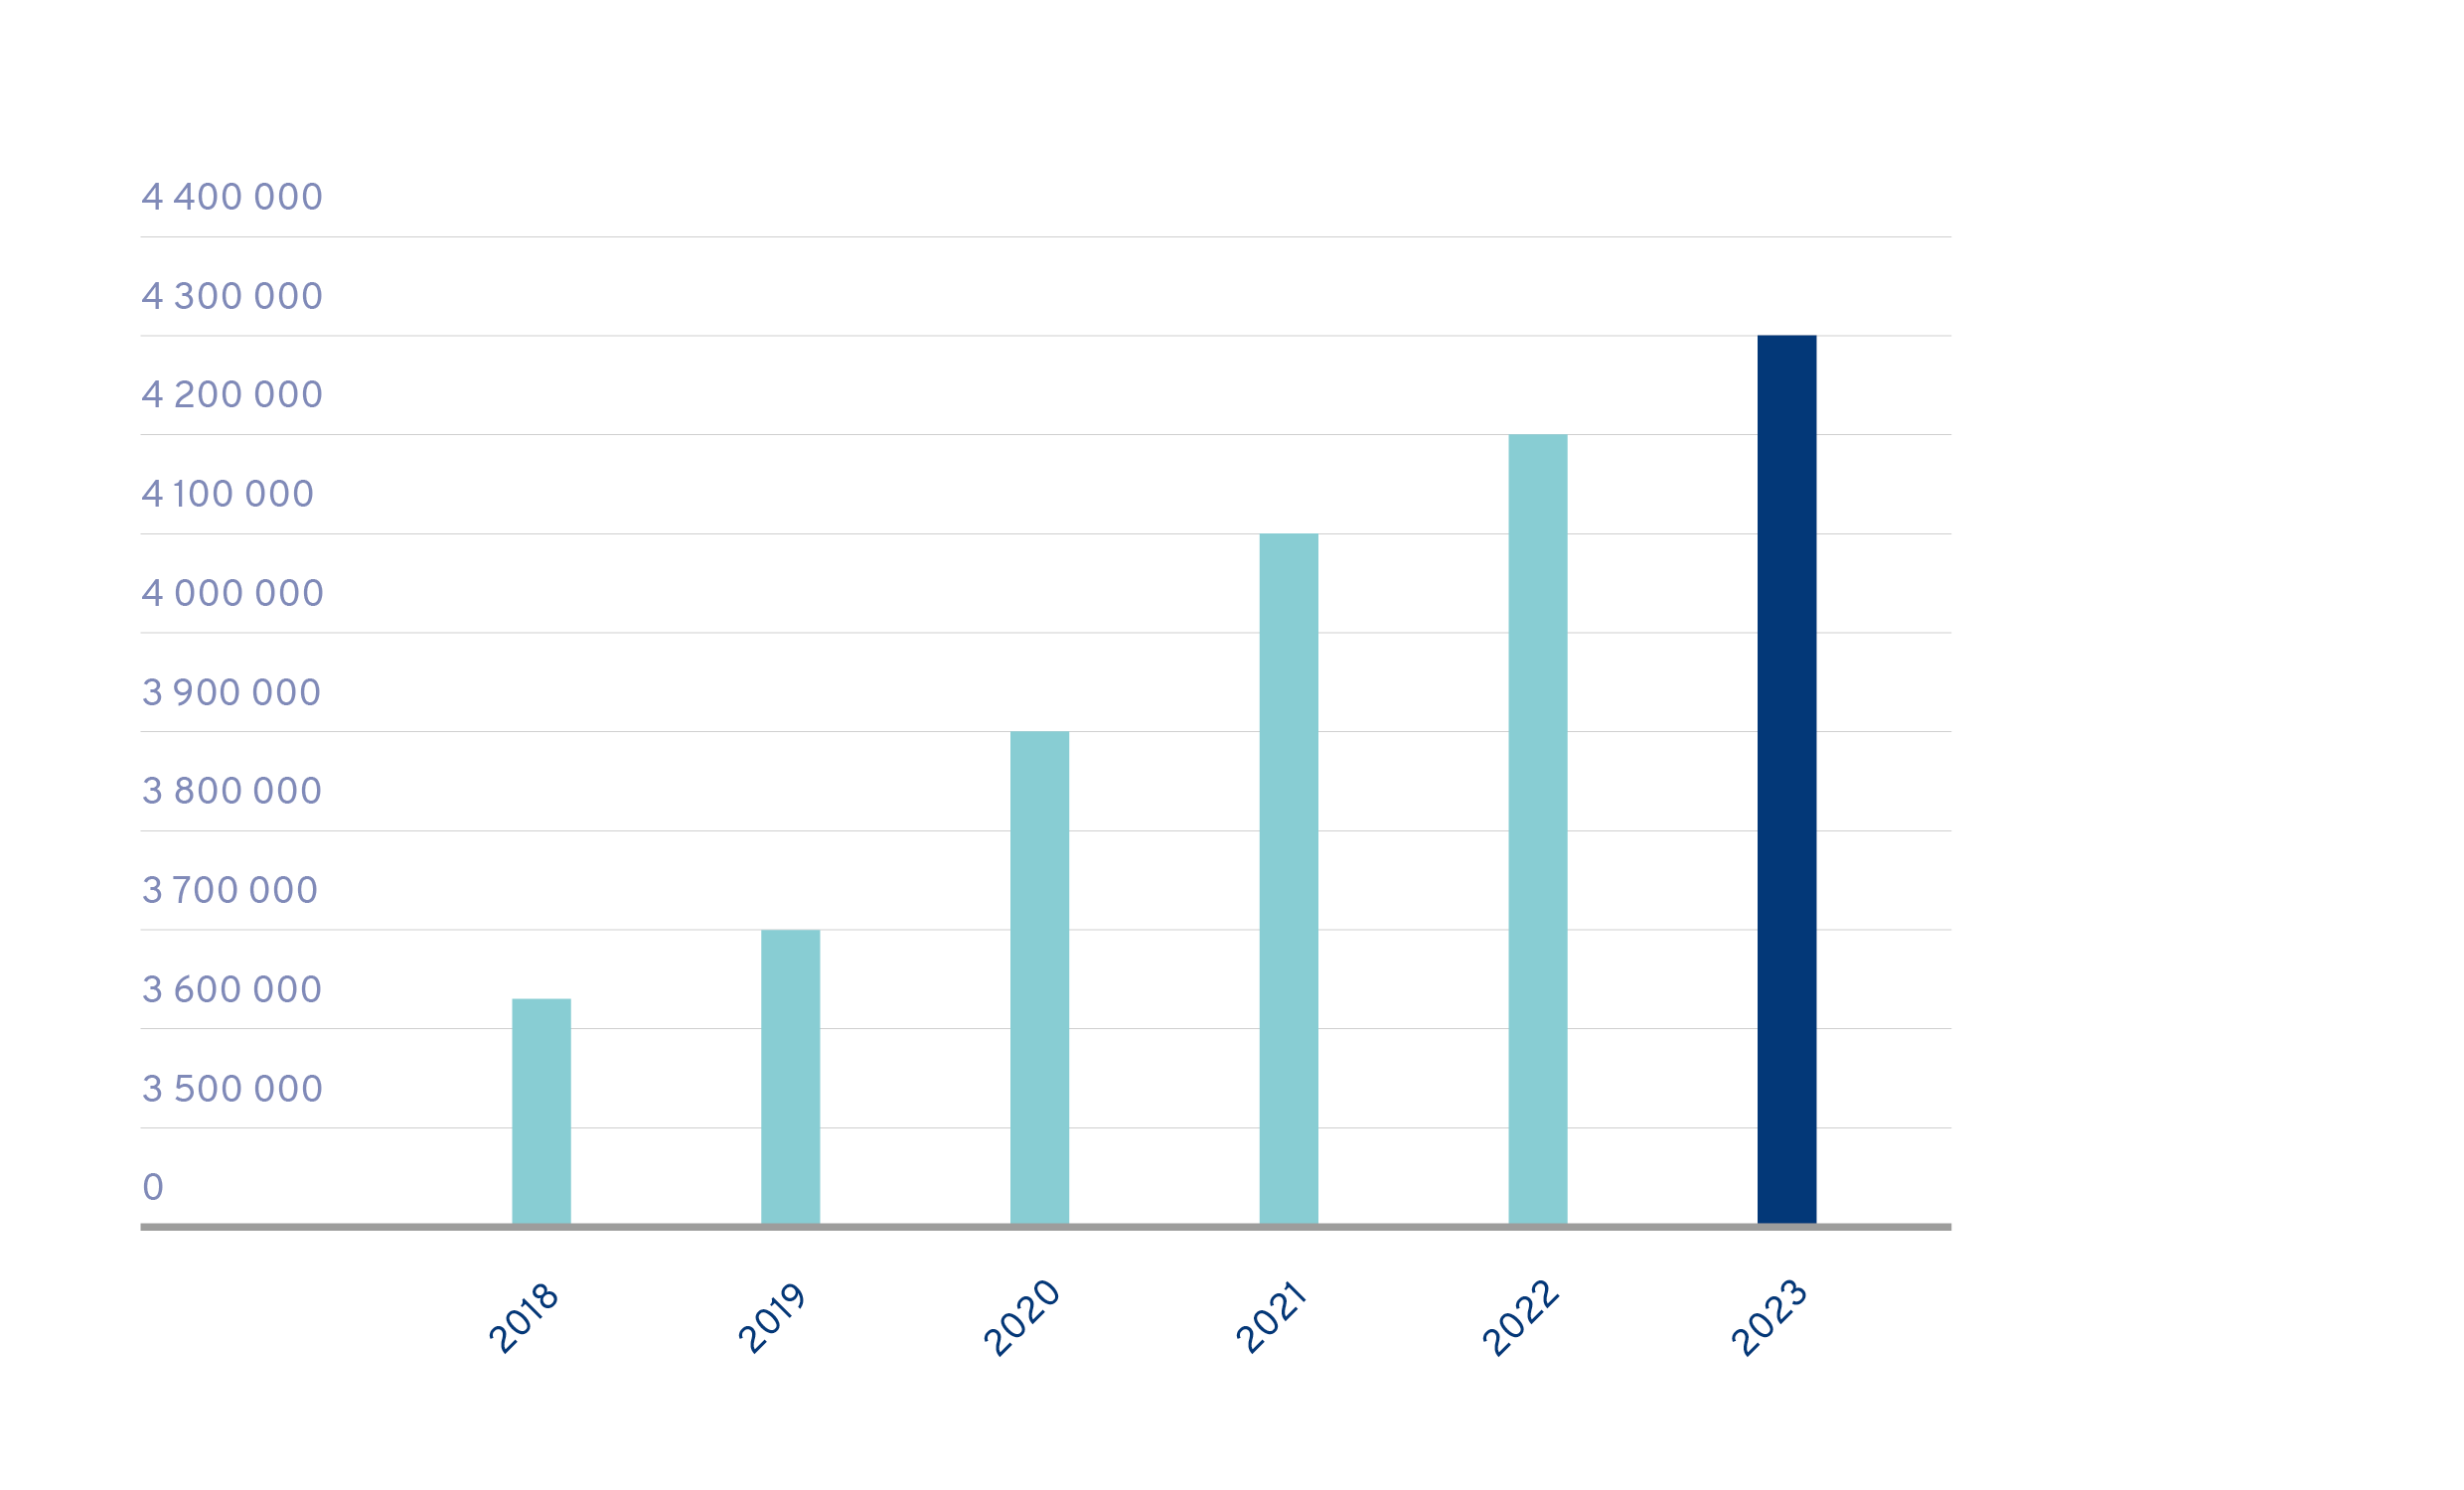 A bar chart showing the development of the number of unique persons identified electronically at least once a year between 2018 and 2023: In 2023, up to 4.3 million persons identified themselves at least once a year in an electronic public e-service. In 2018, this number was around 3.6 million.